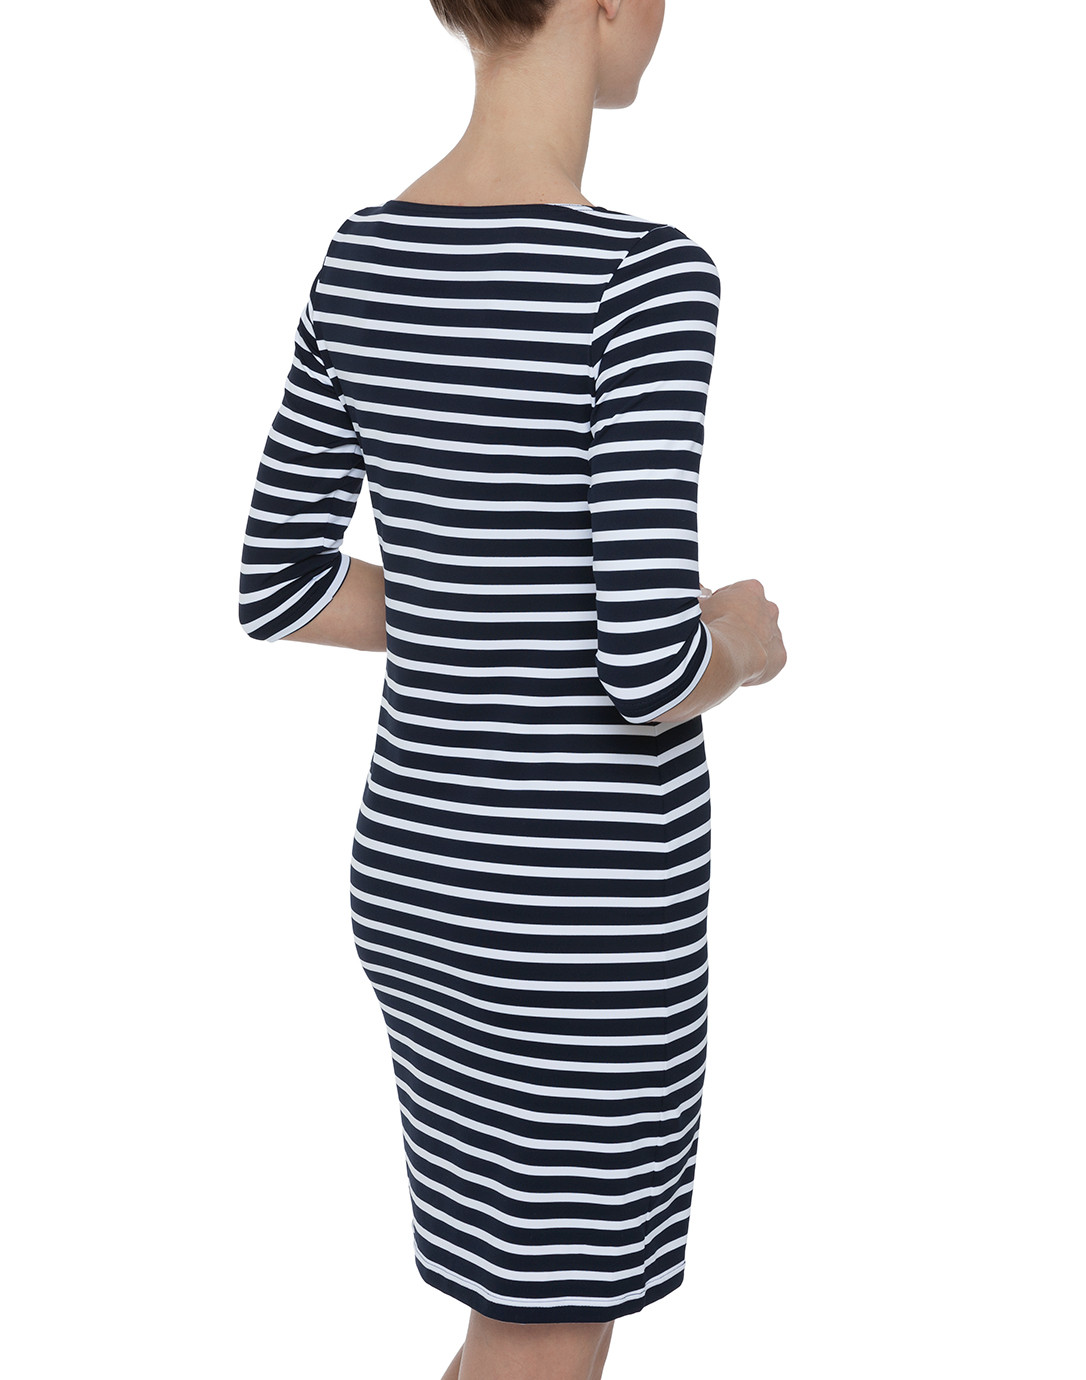 Propriano Navy and White Striped Dress ...